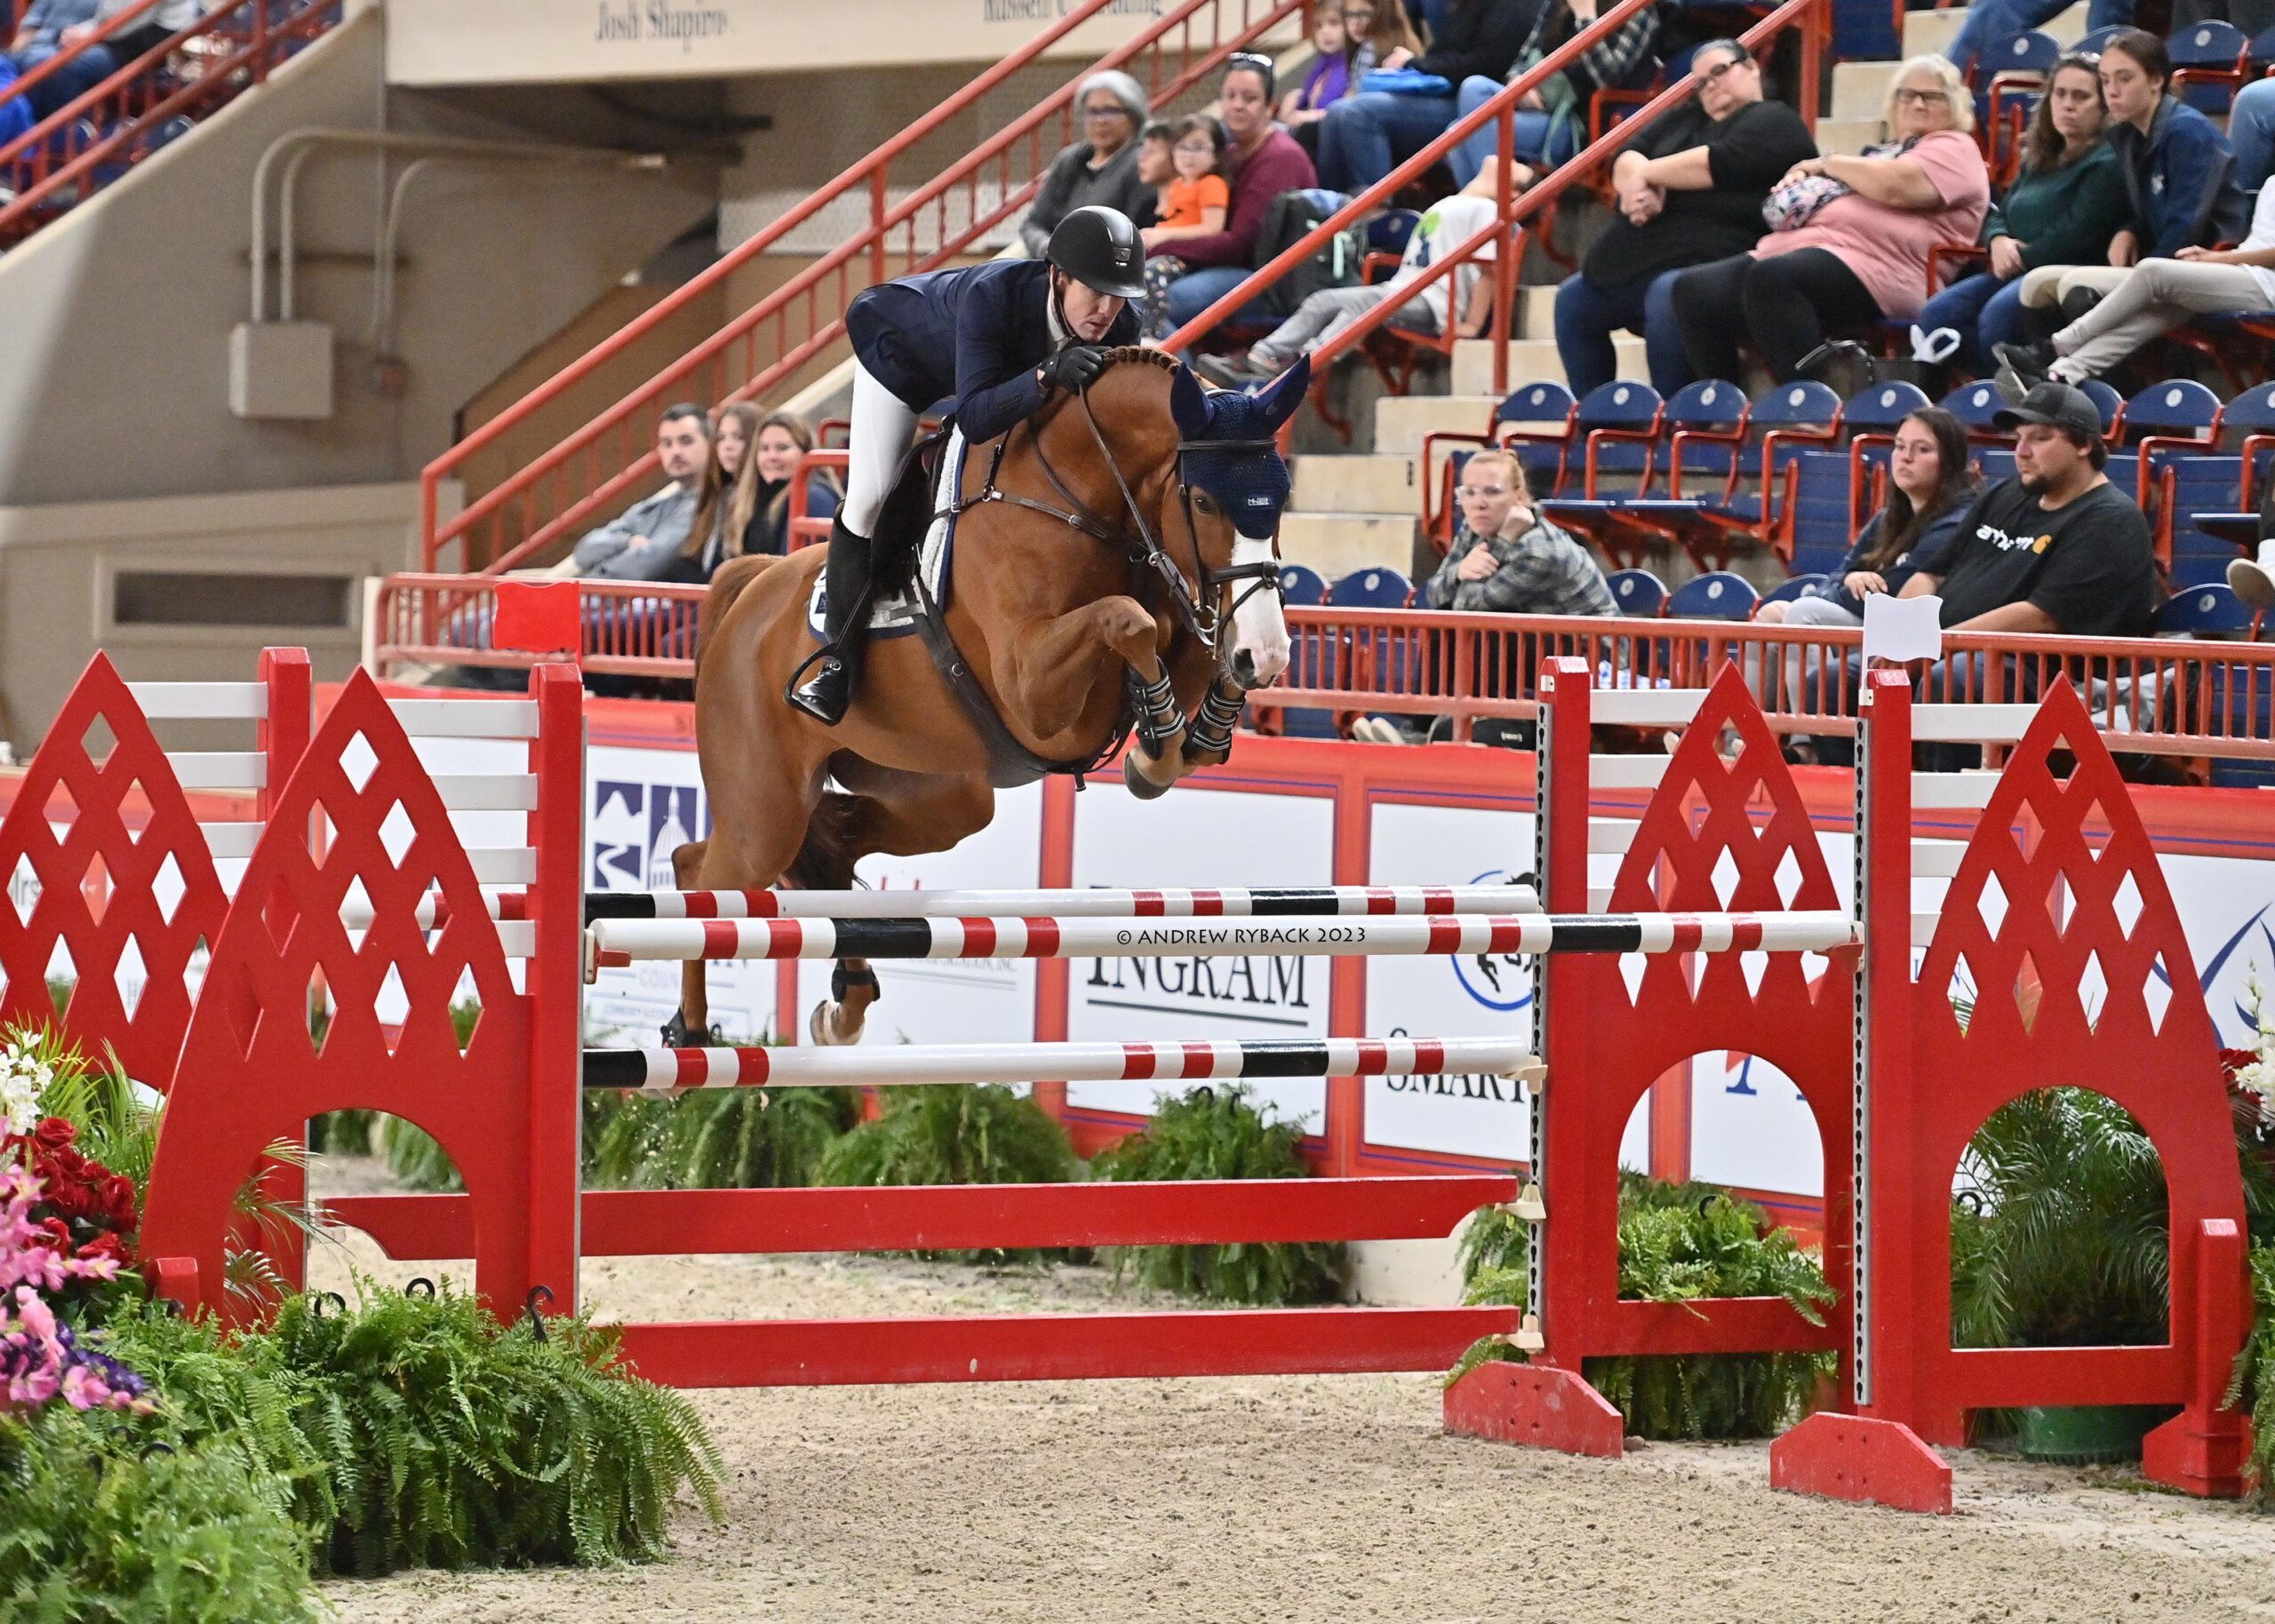 McLain Ward and Kyrlanthe Capture Victory in Their U.S. Debut at Pennsylvania National Horse Show